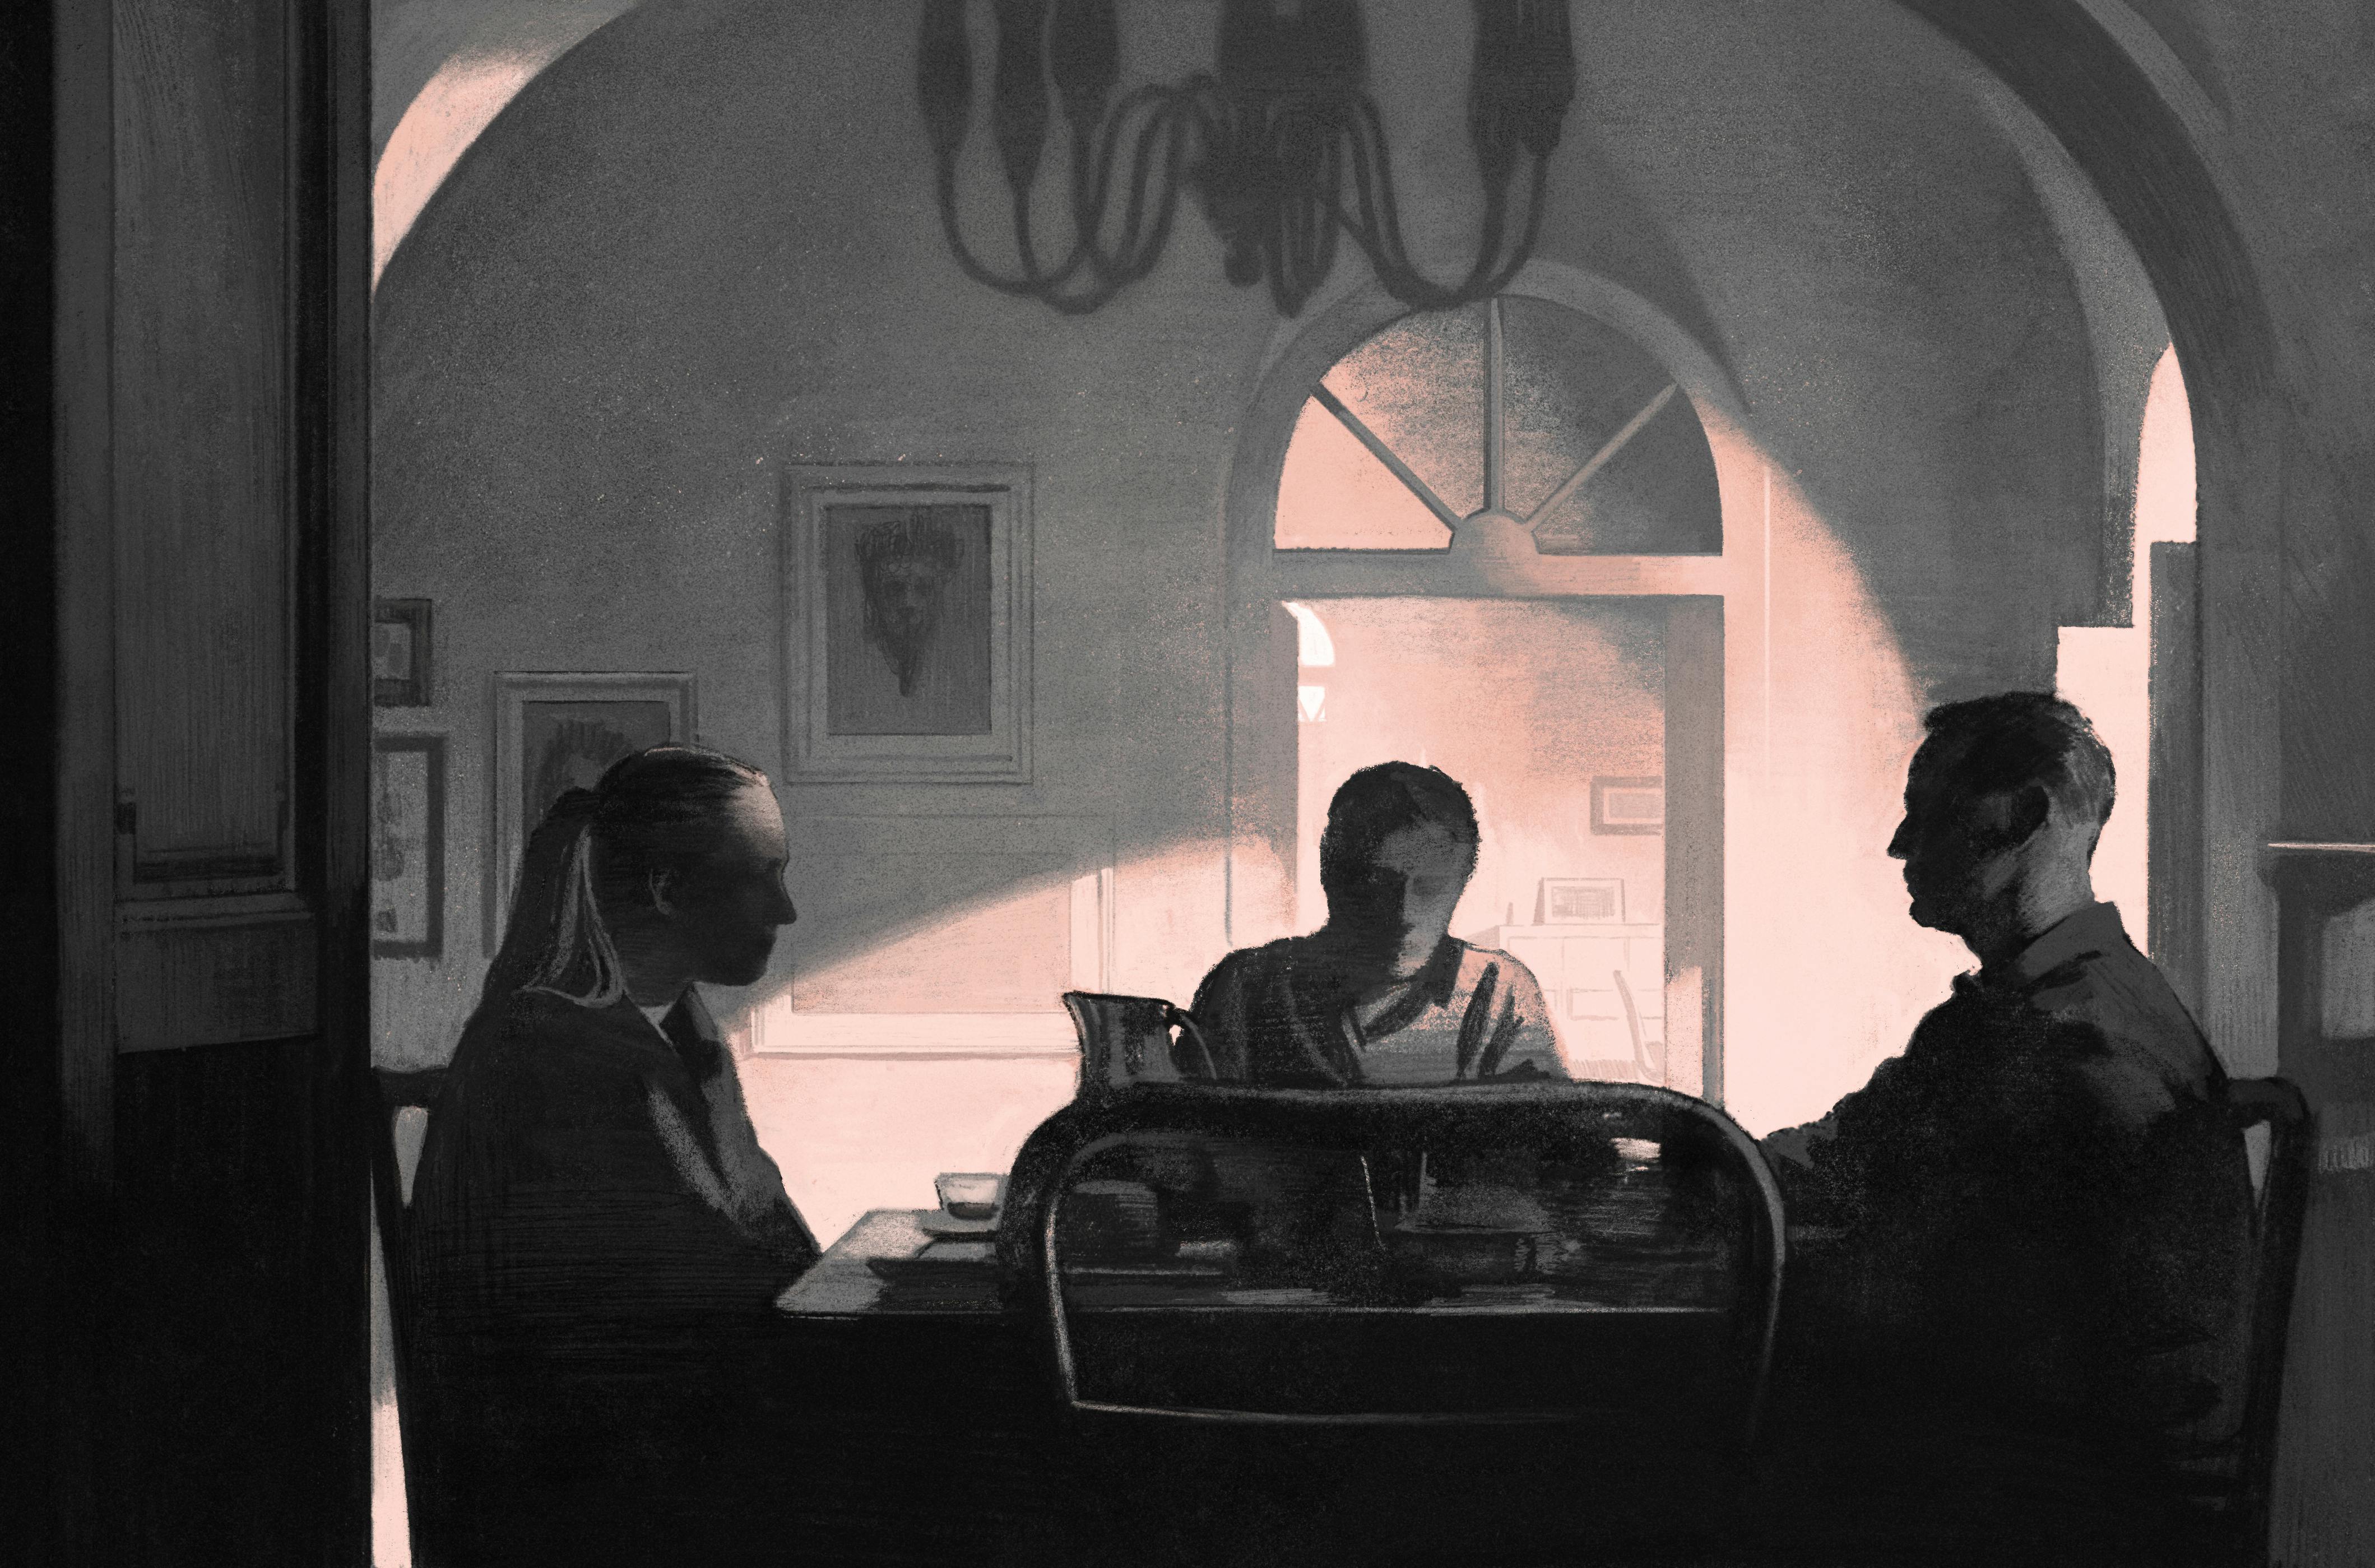 A sketch of Dakota Fanning, Johnny Flynn, and Andrew Scott in character, sitting around a dinner table.